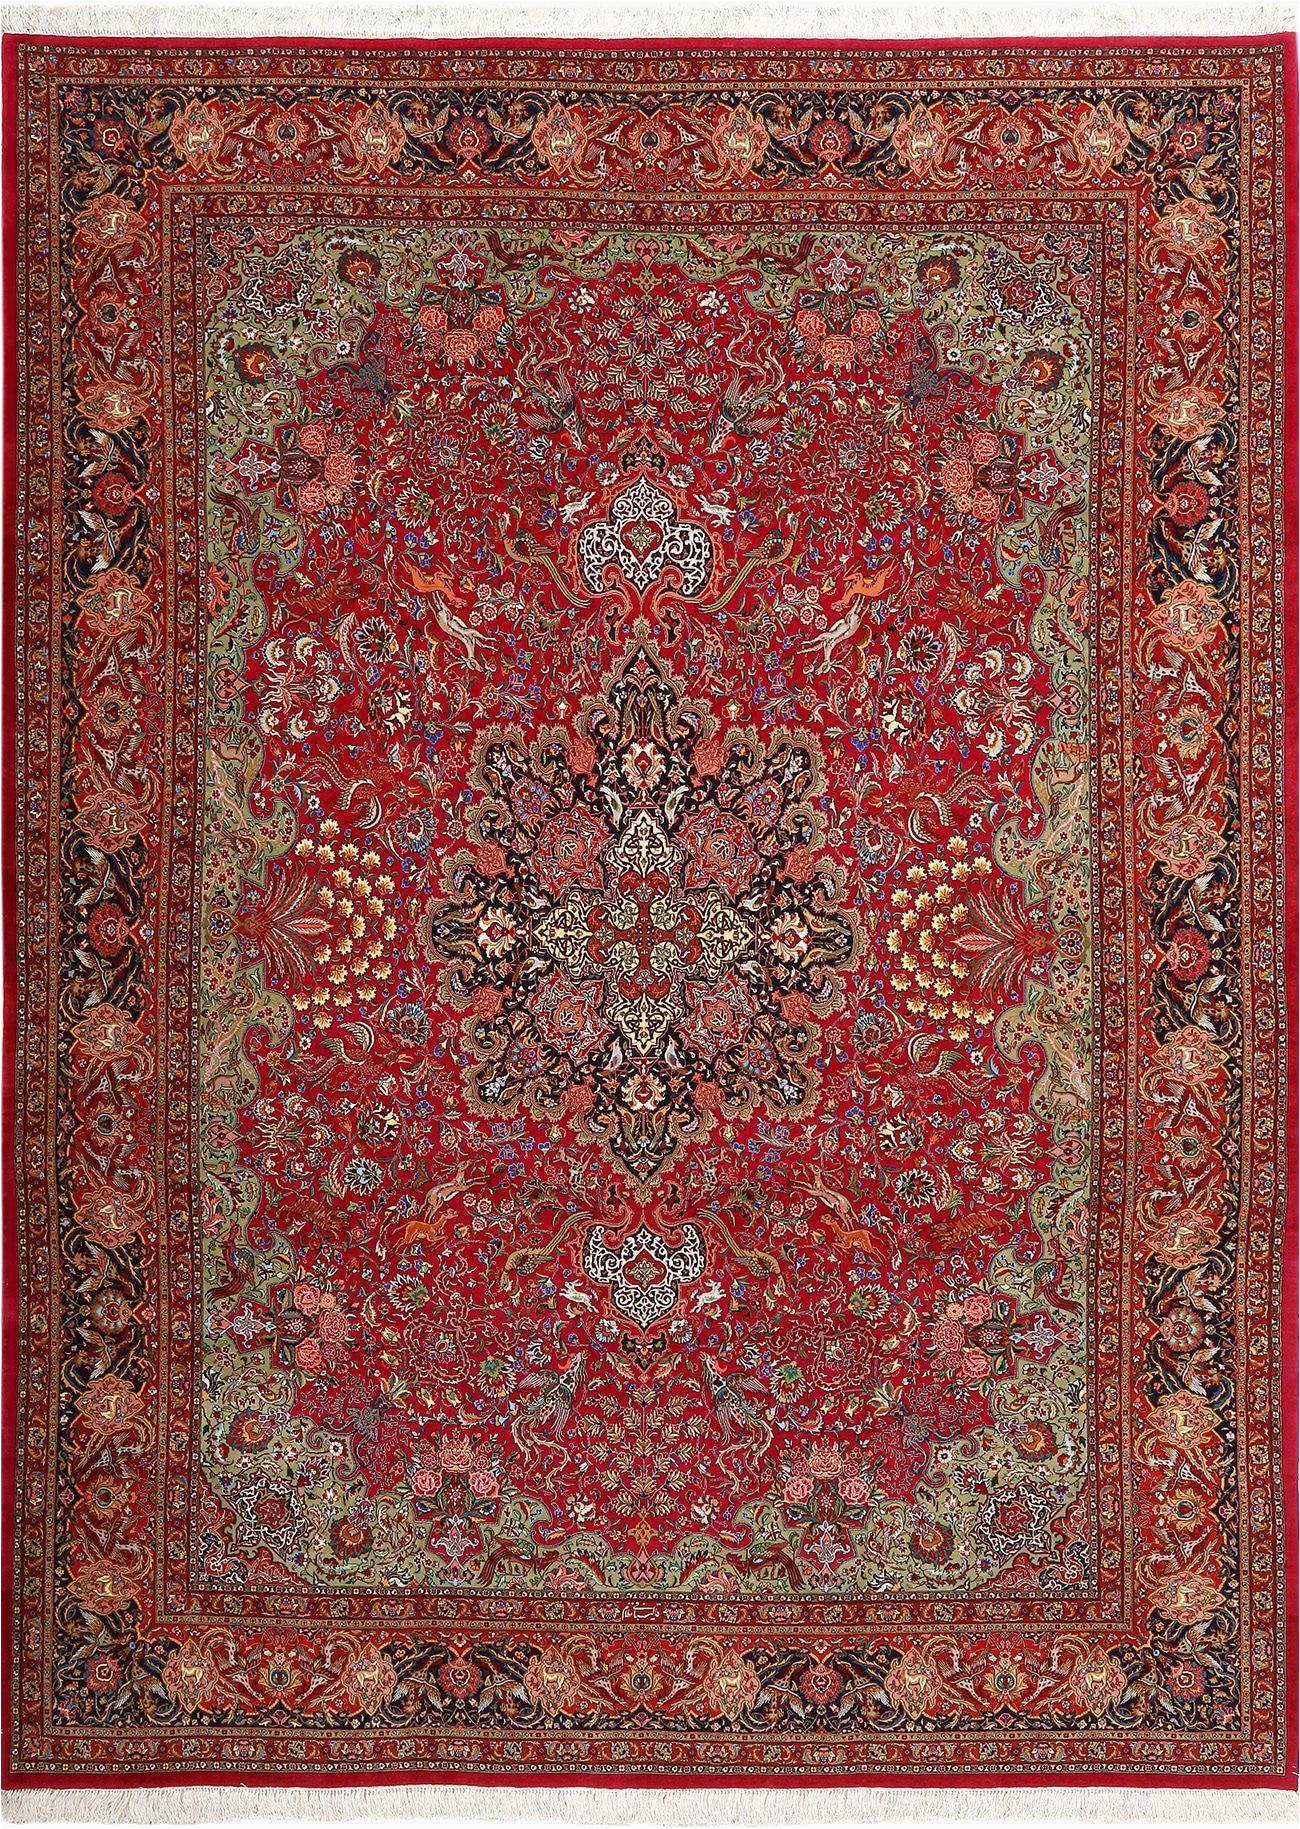 Inexpensive area Rugs Near Me Largest Selection Of area Rugs Near Me area Rugs Home